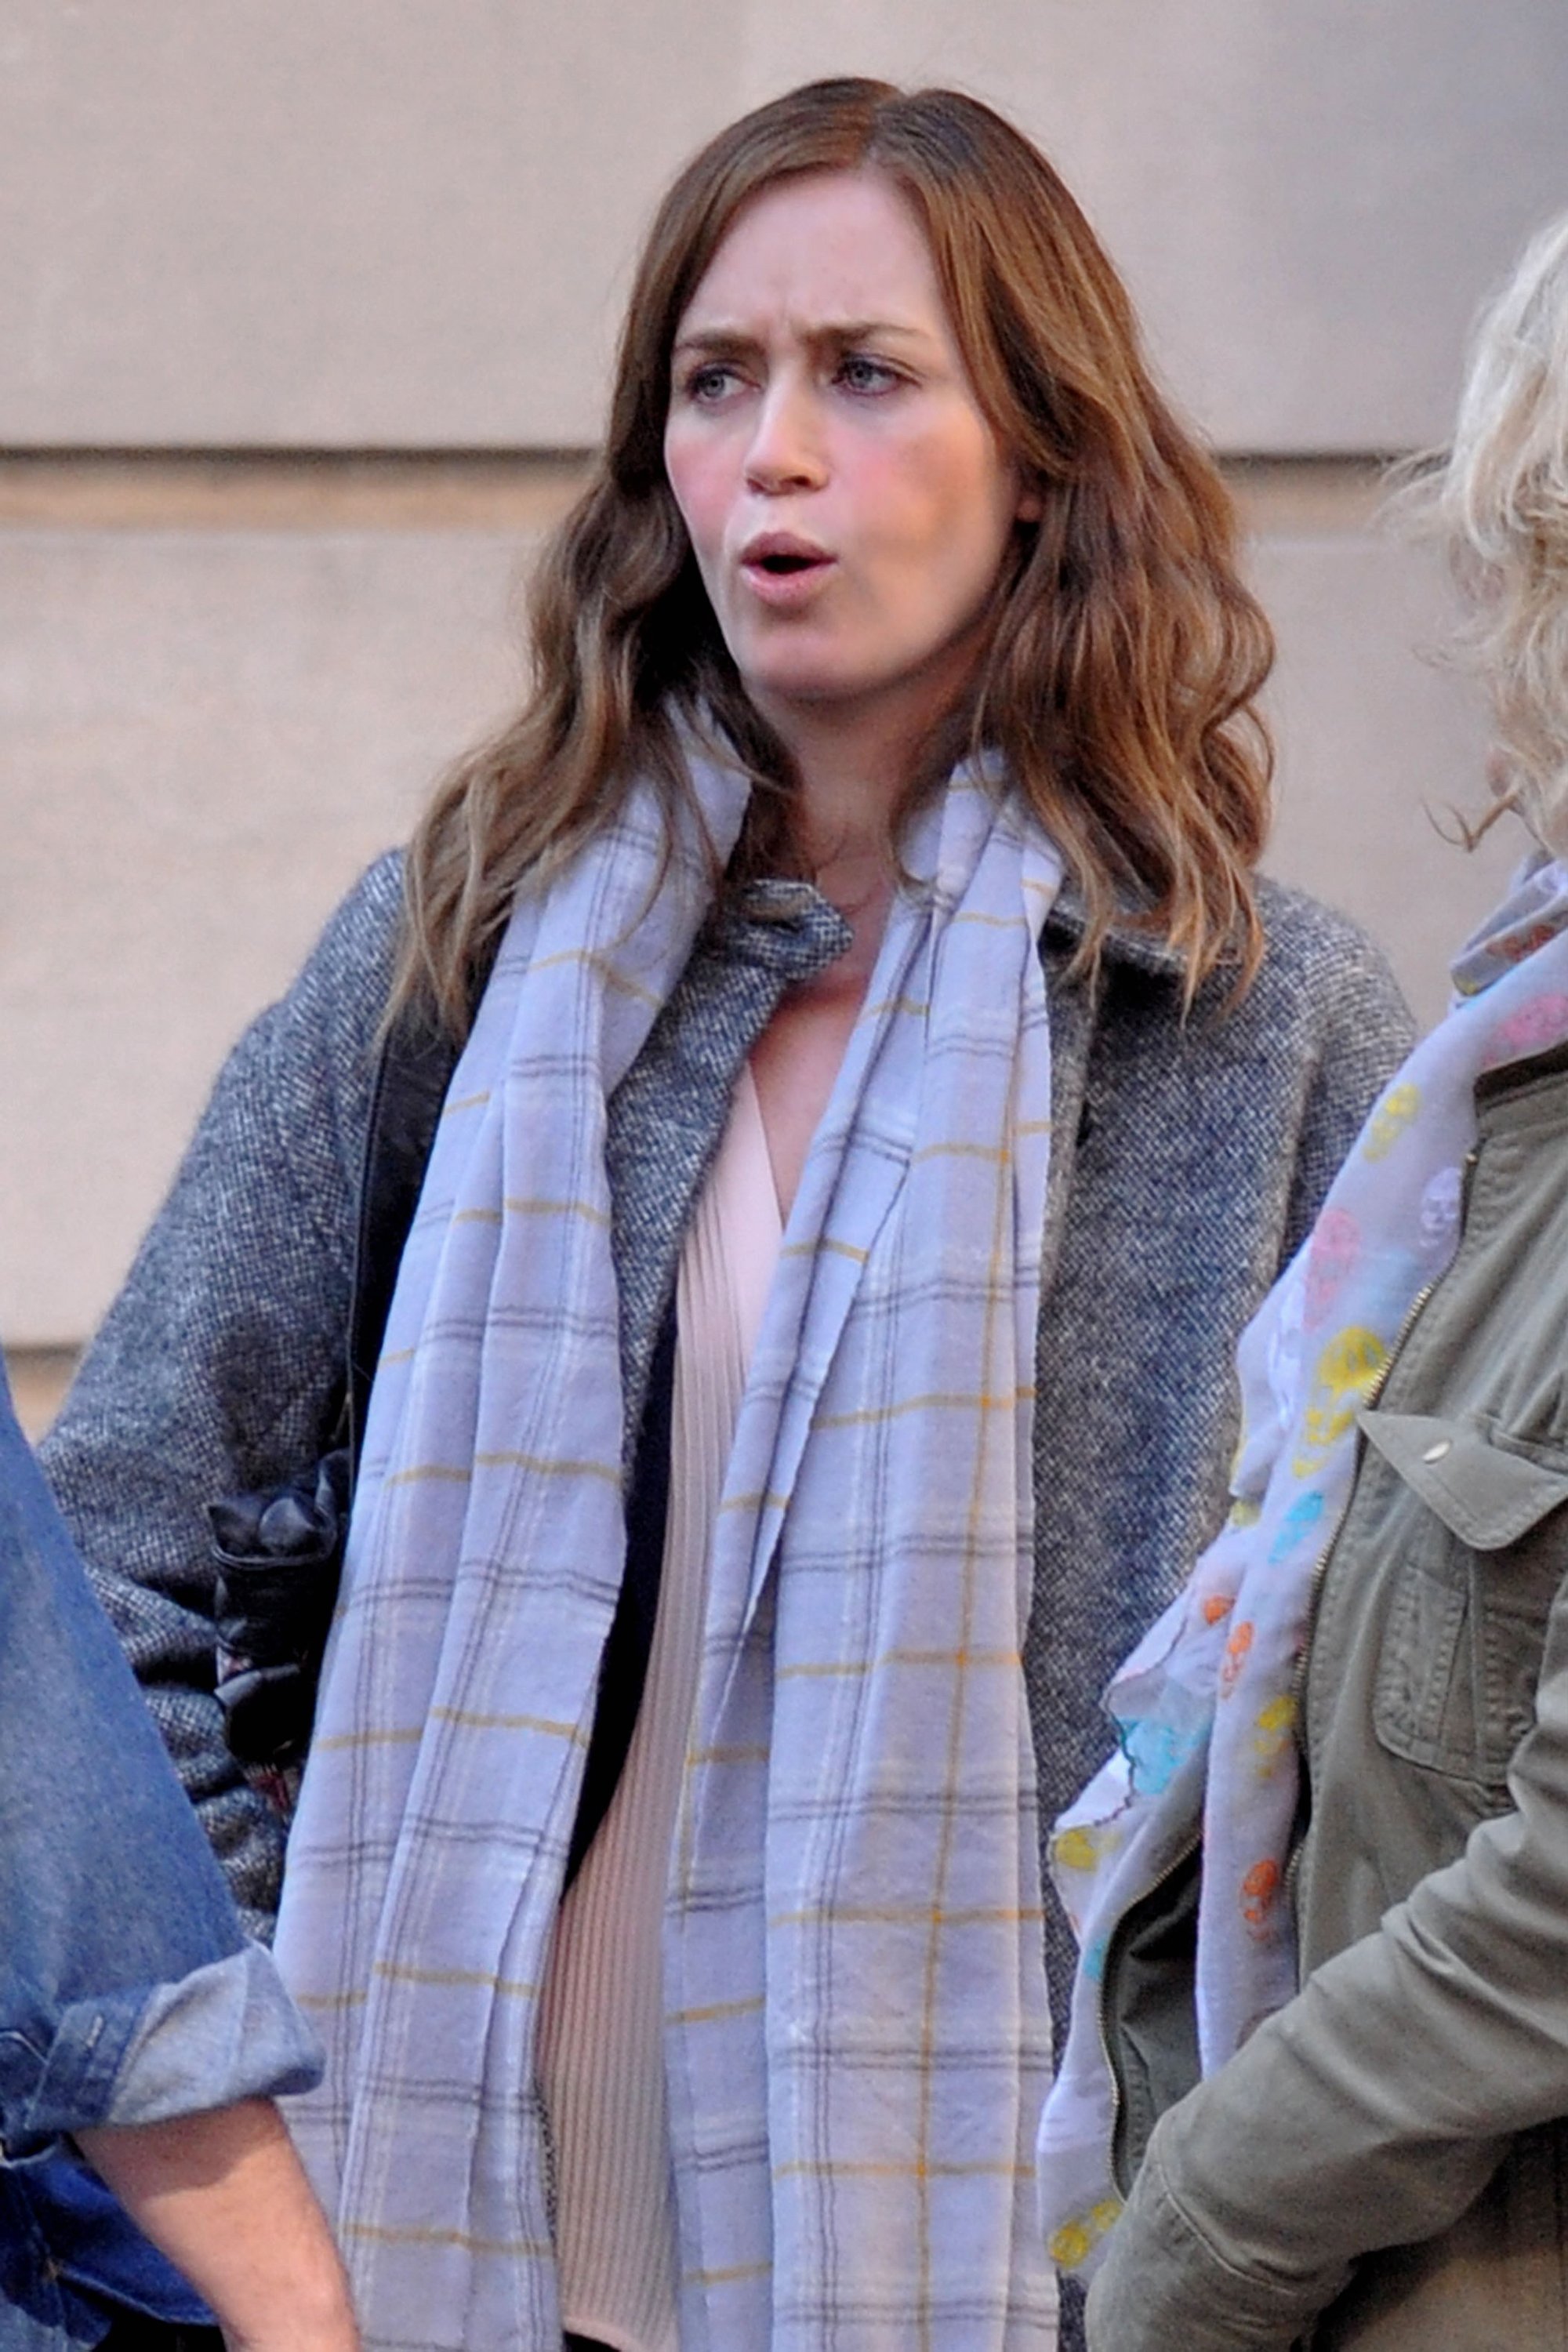 emily-blunt-the-girl-on-the-train-on-set-008.jpg